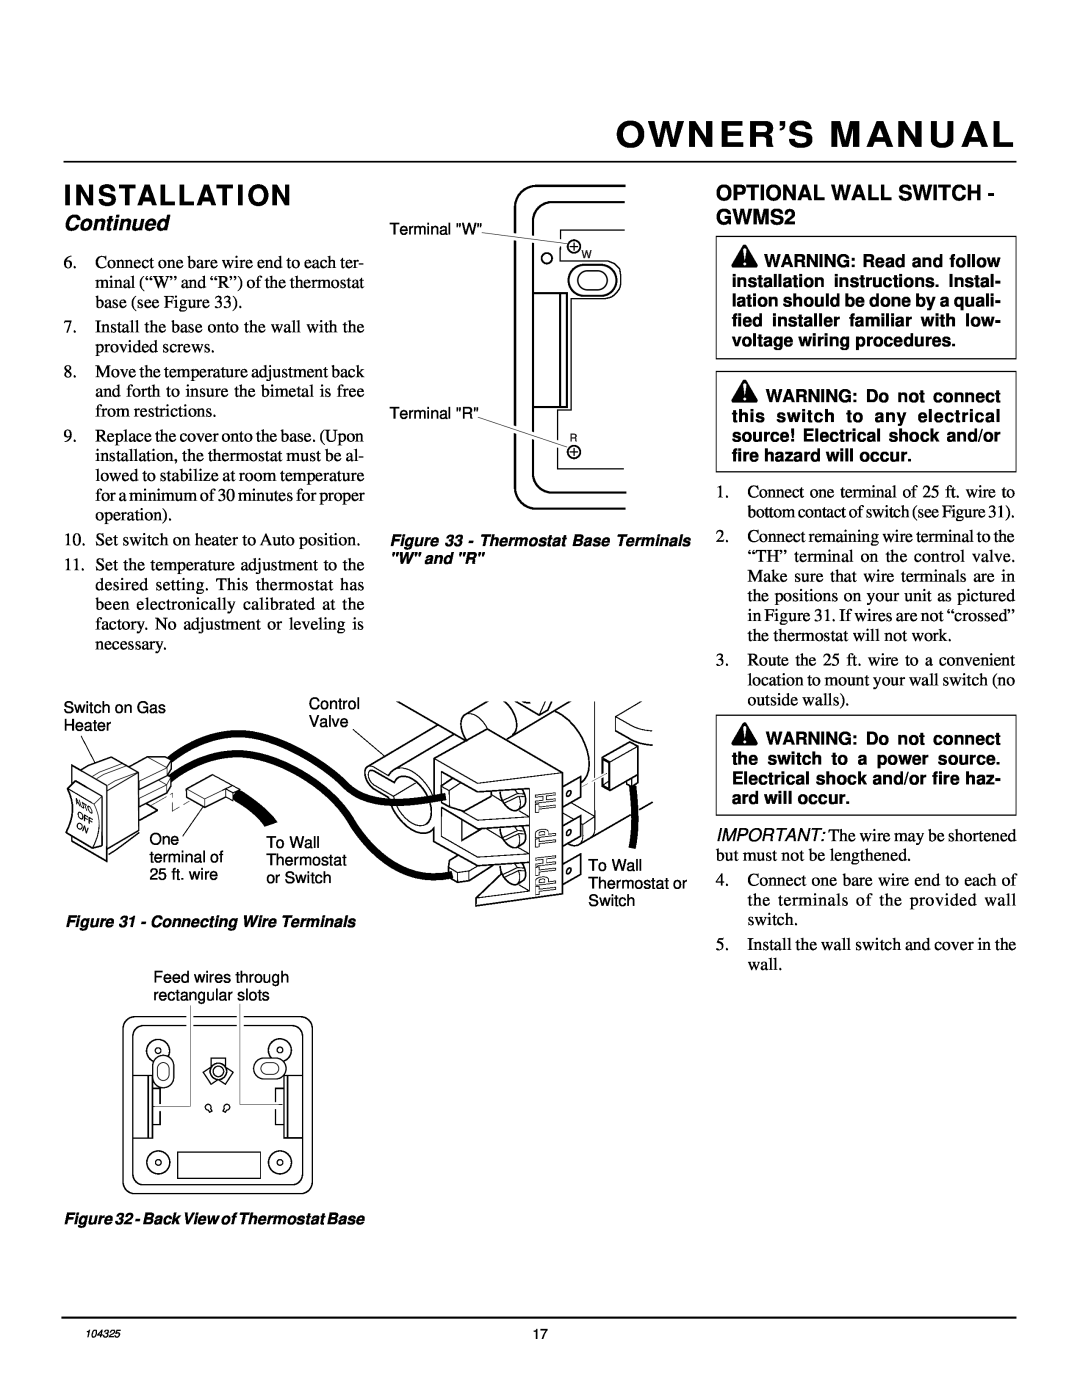 Vanguard Heating VMH26NR installation manual OPTIONAL WALL SWITCH - GWMS2, Installation, Continued 